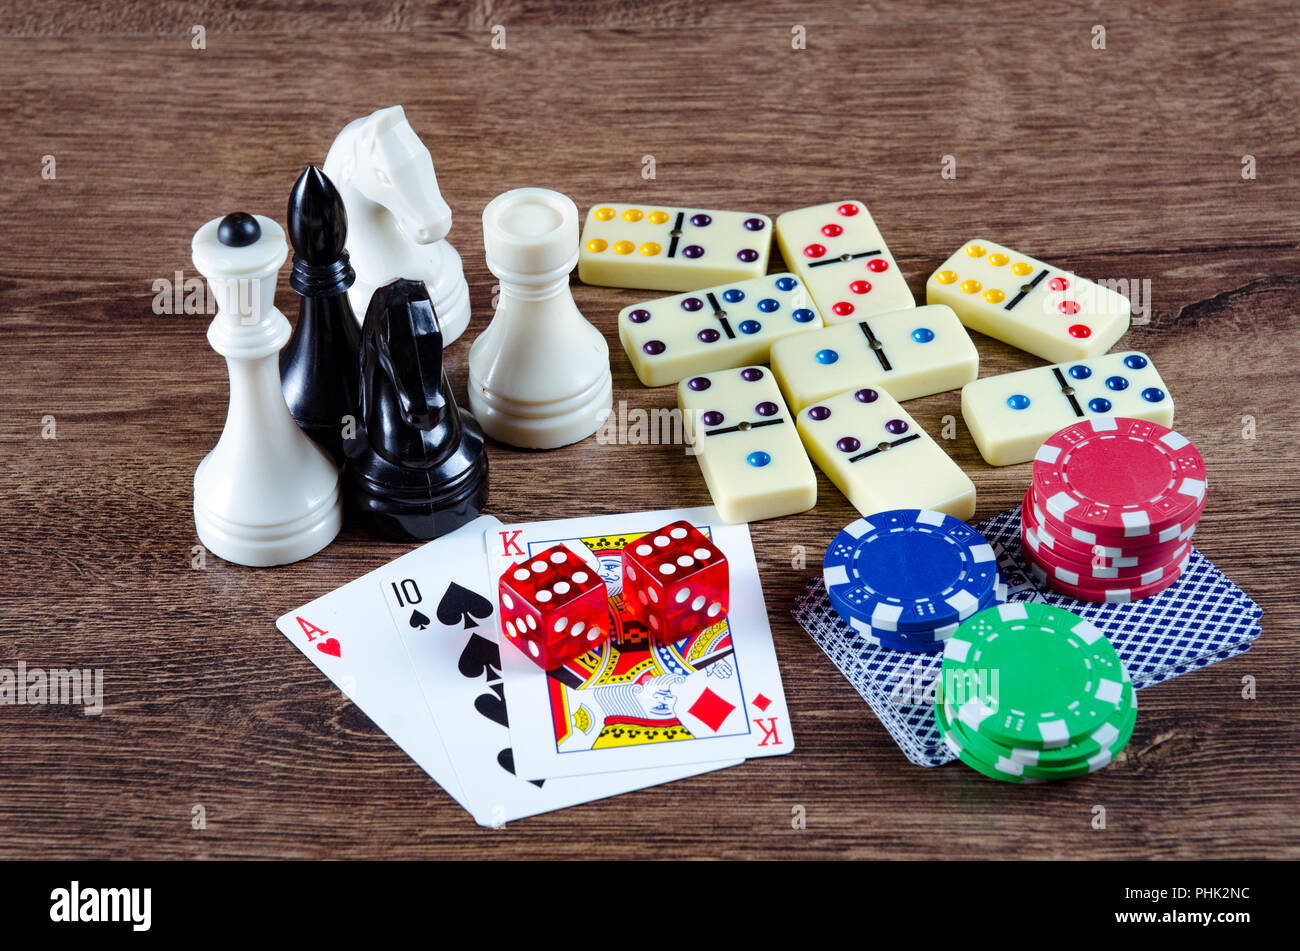 Chess and other gaming accessories Stock Photo - Alamy